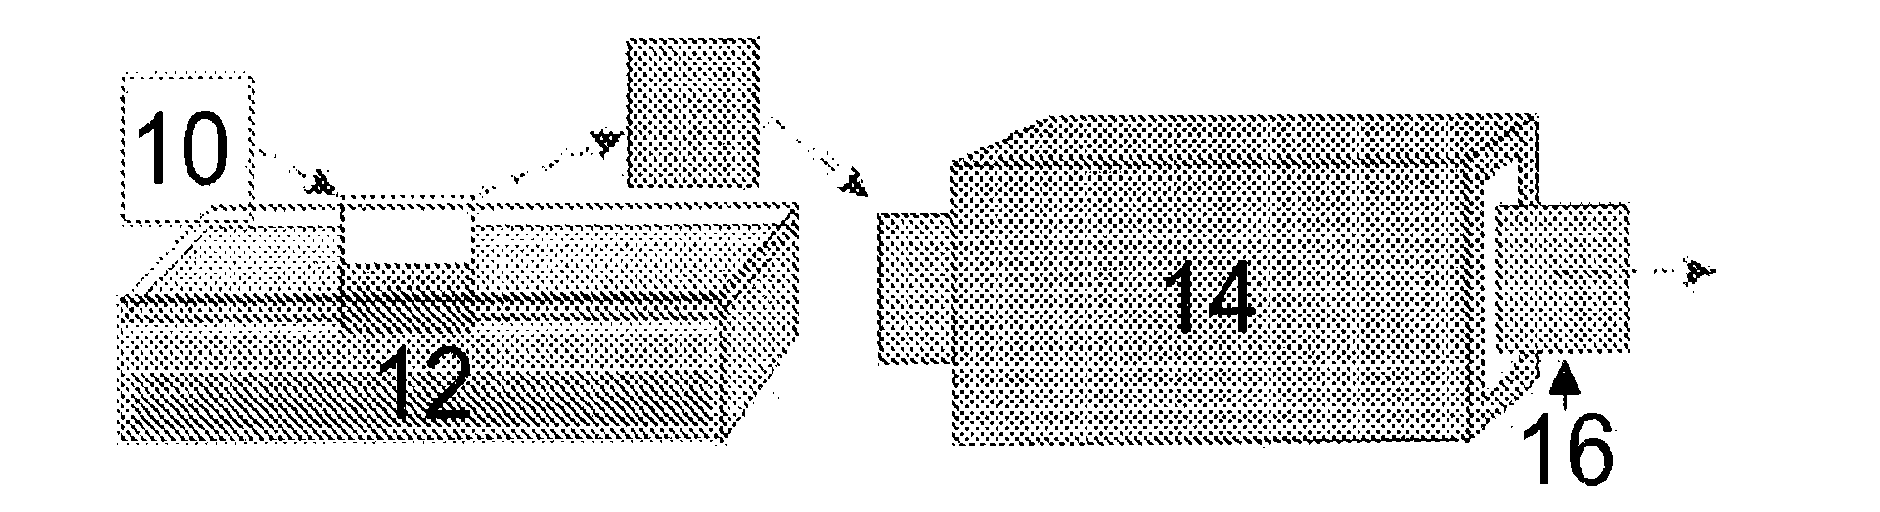 Protective coating for glass manufacturing and processing into articles